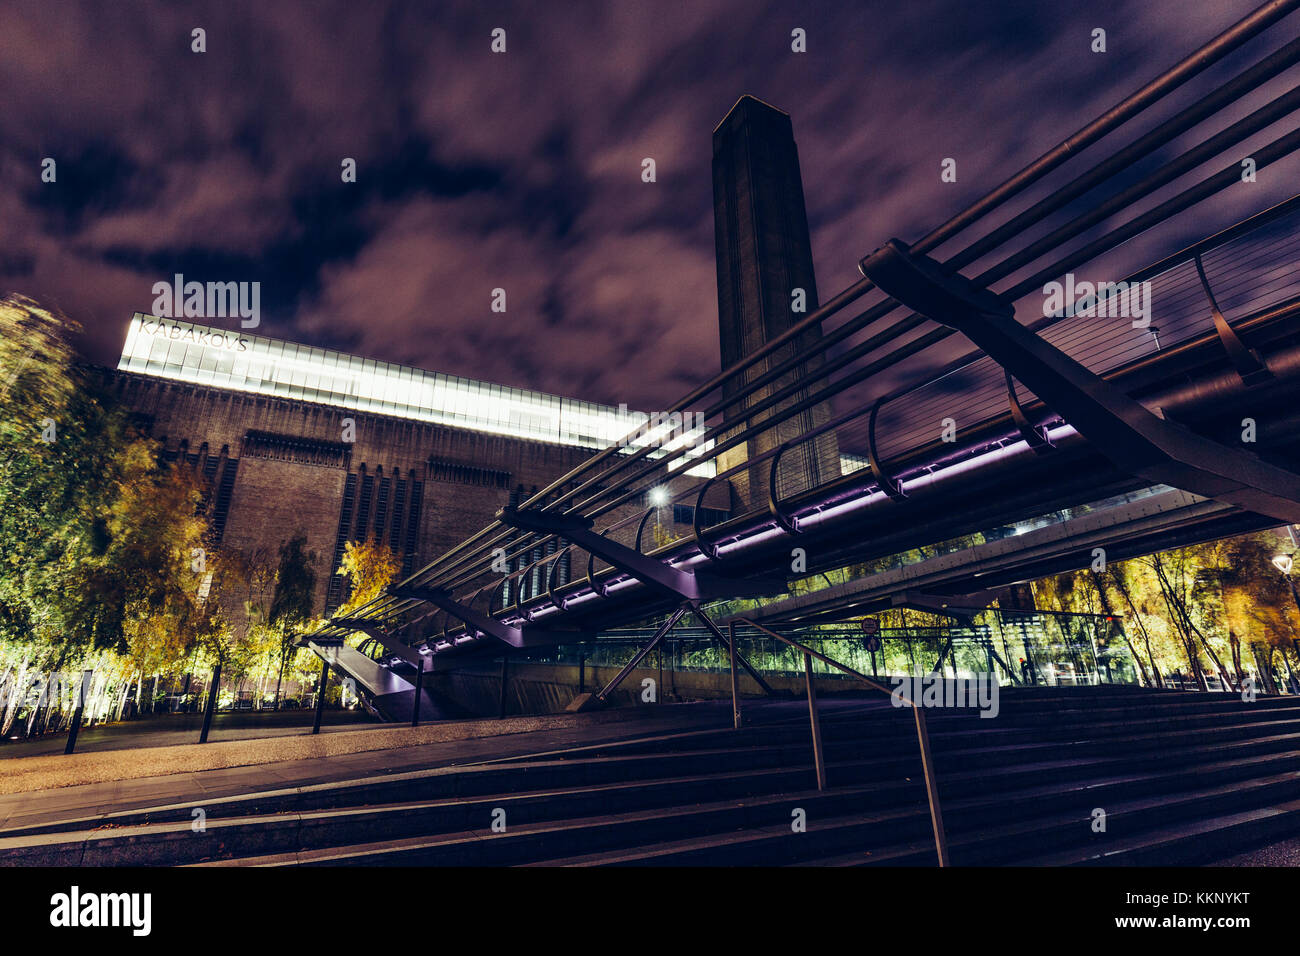 Low angle view of the Tate Modern building and Millennium Bridge  in London at night Stock Photo